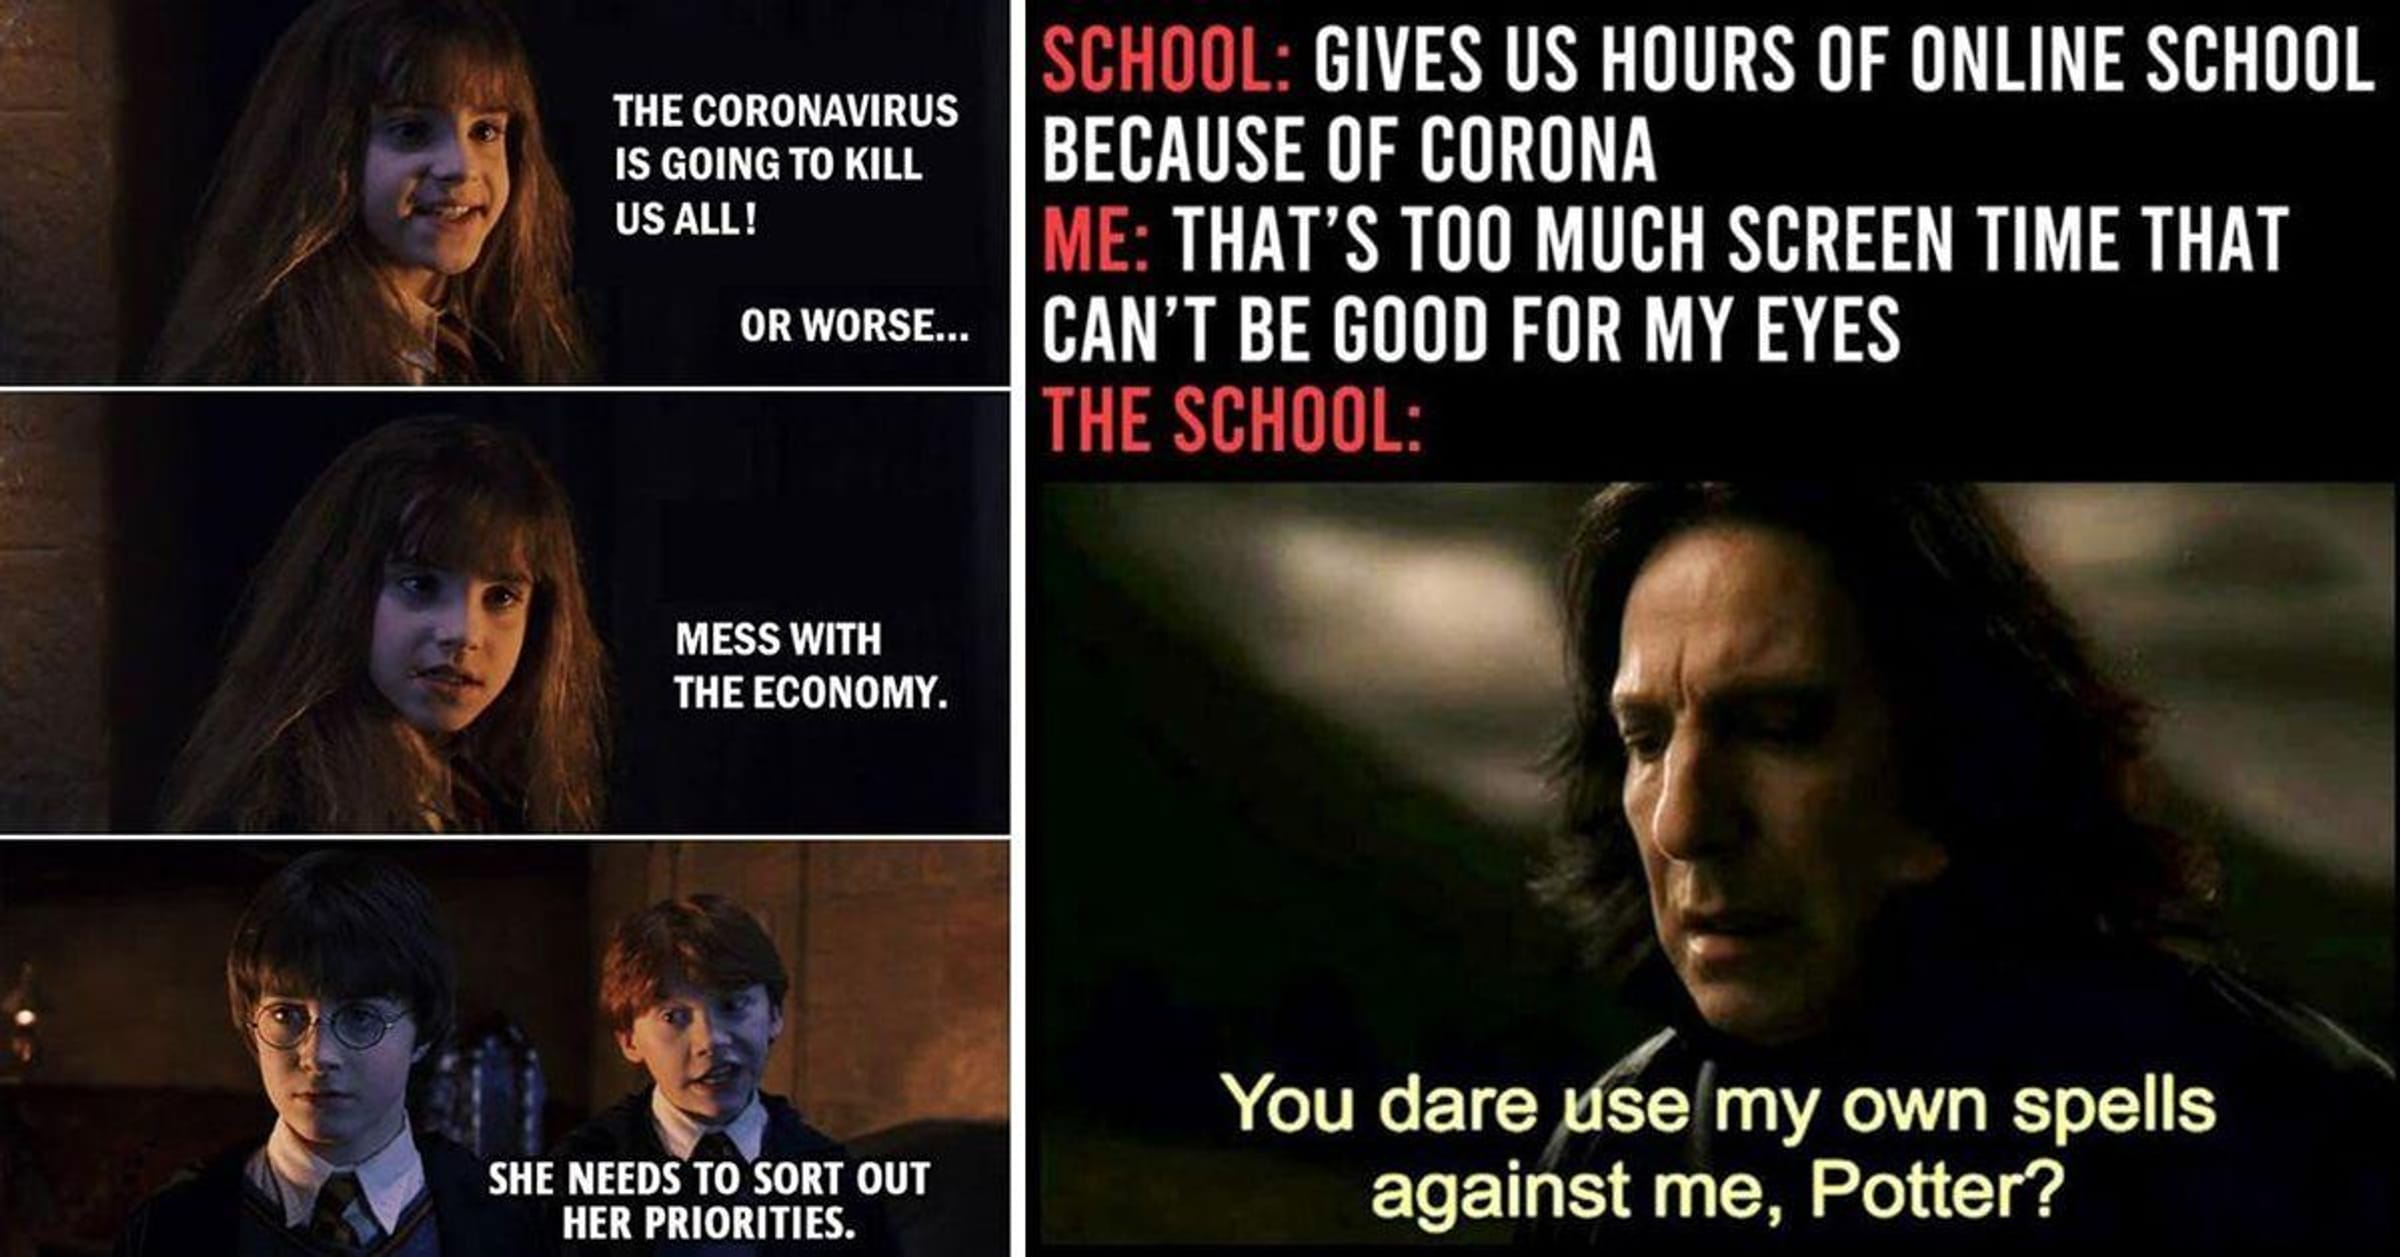 Not the smoothest approach : r/HarryPotterMemes